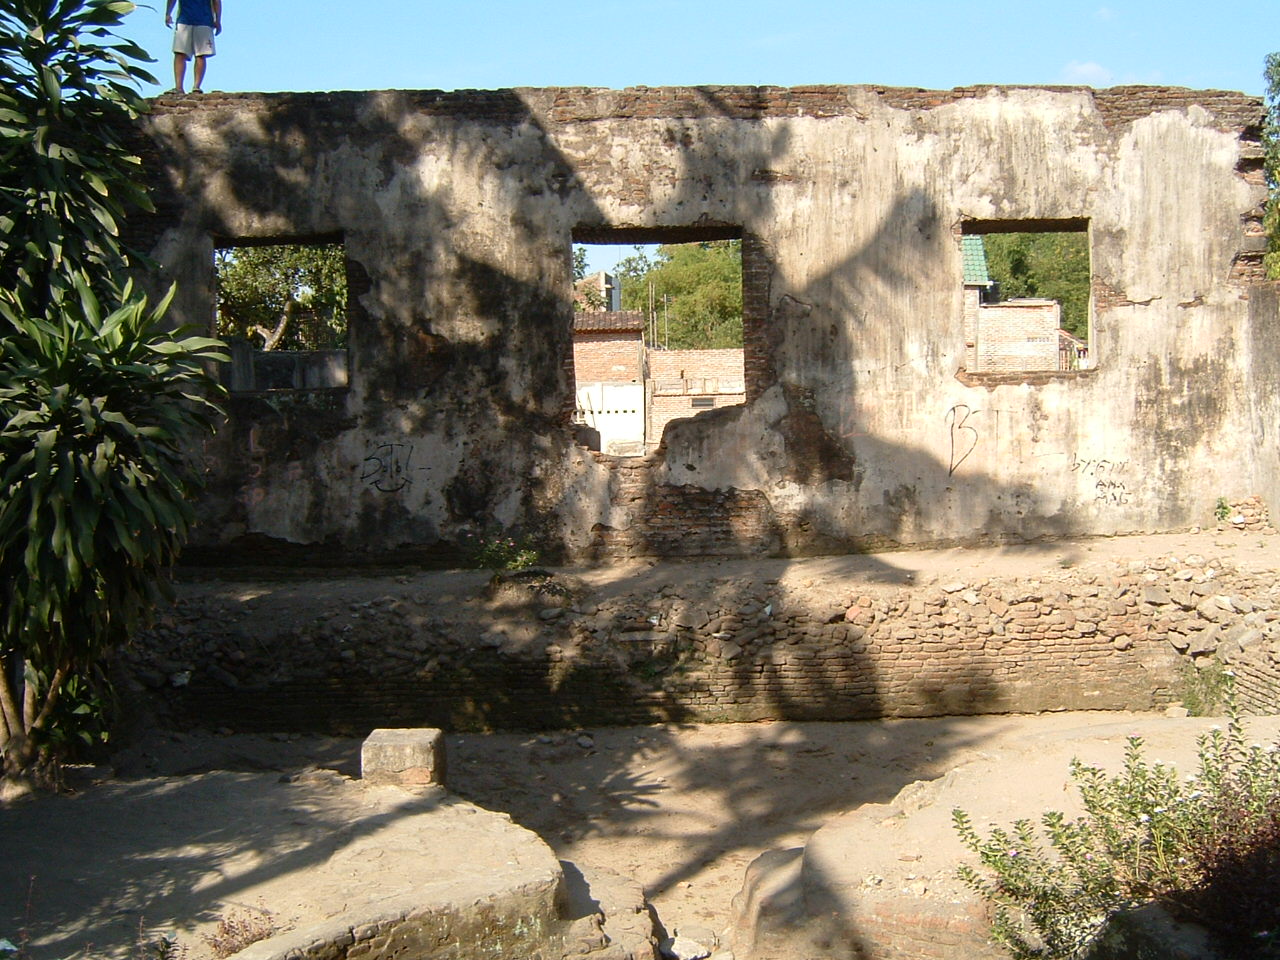 View looking east over pool at doorway flanked by two windows